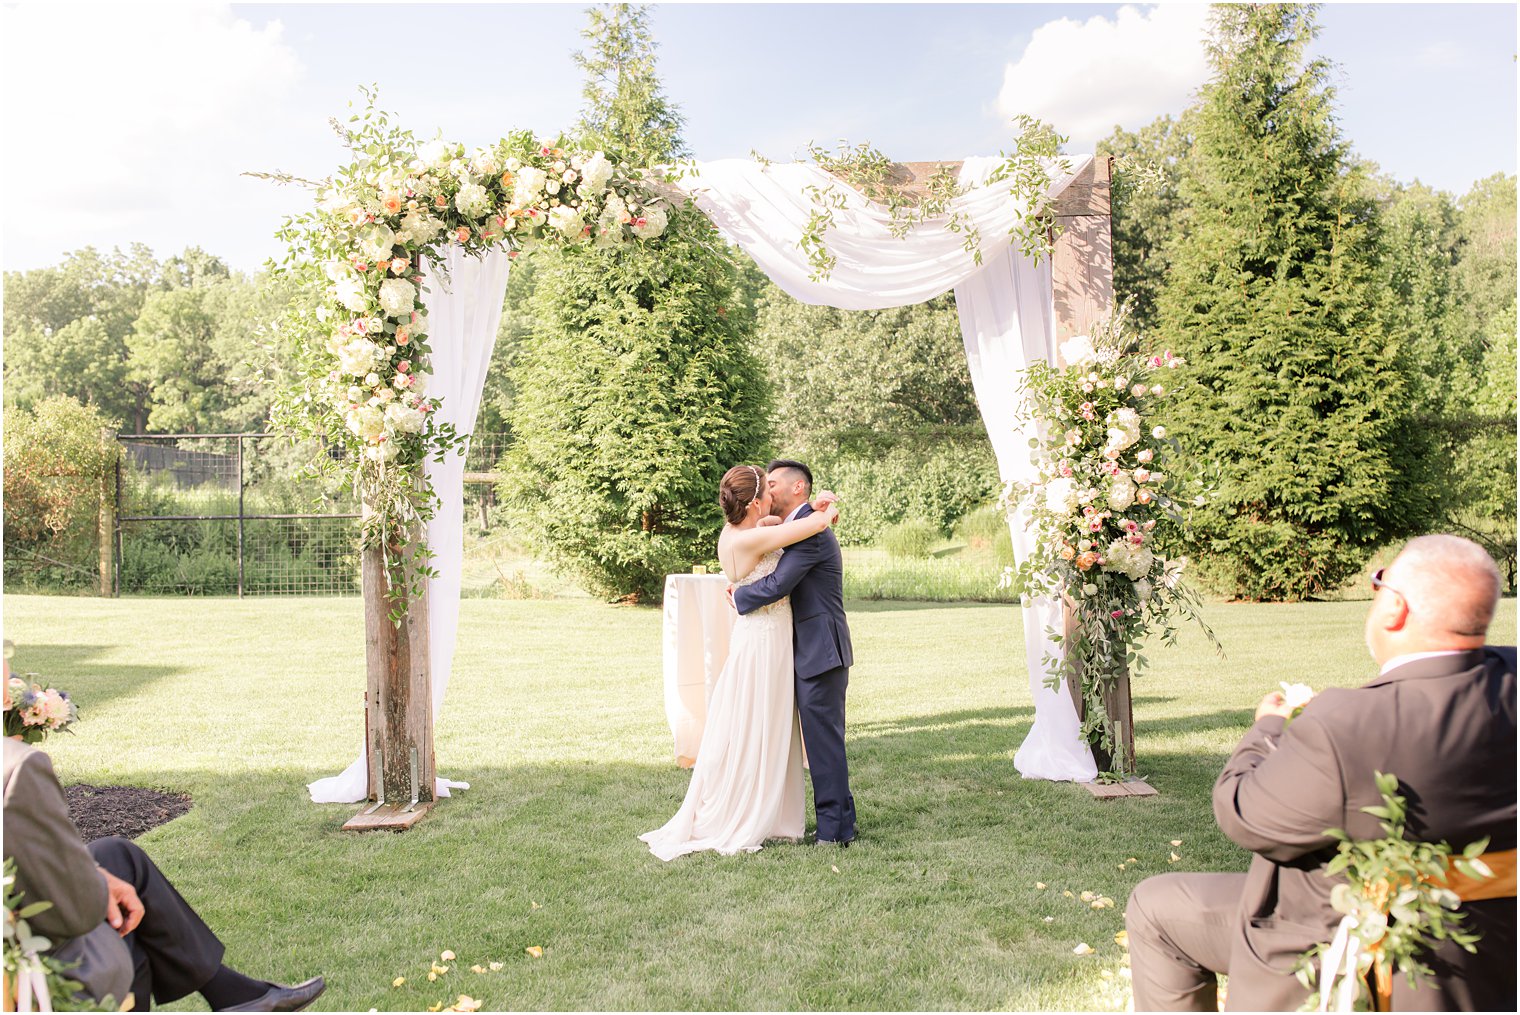 Outdoor wedding ceremony at Ninety Acres at Natirar in Peapack NJ